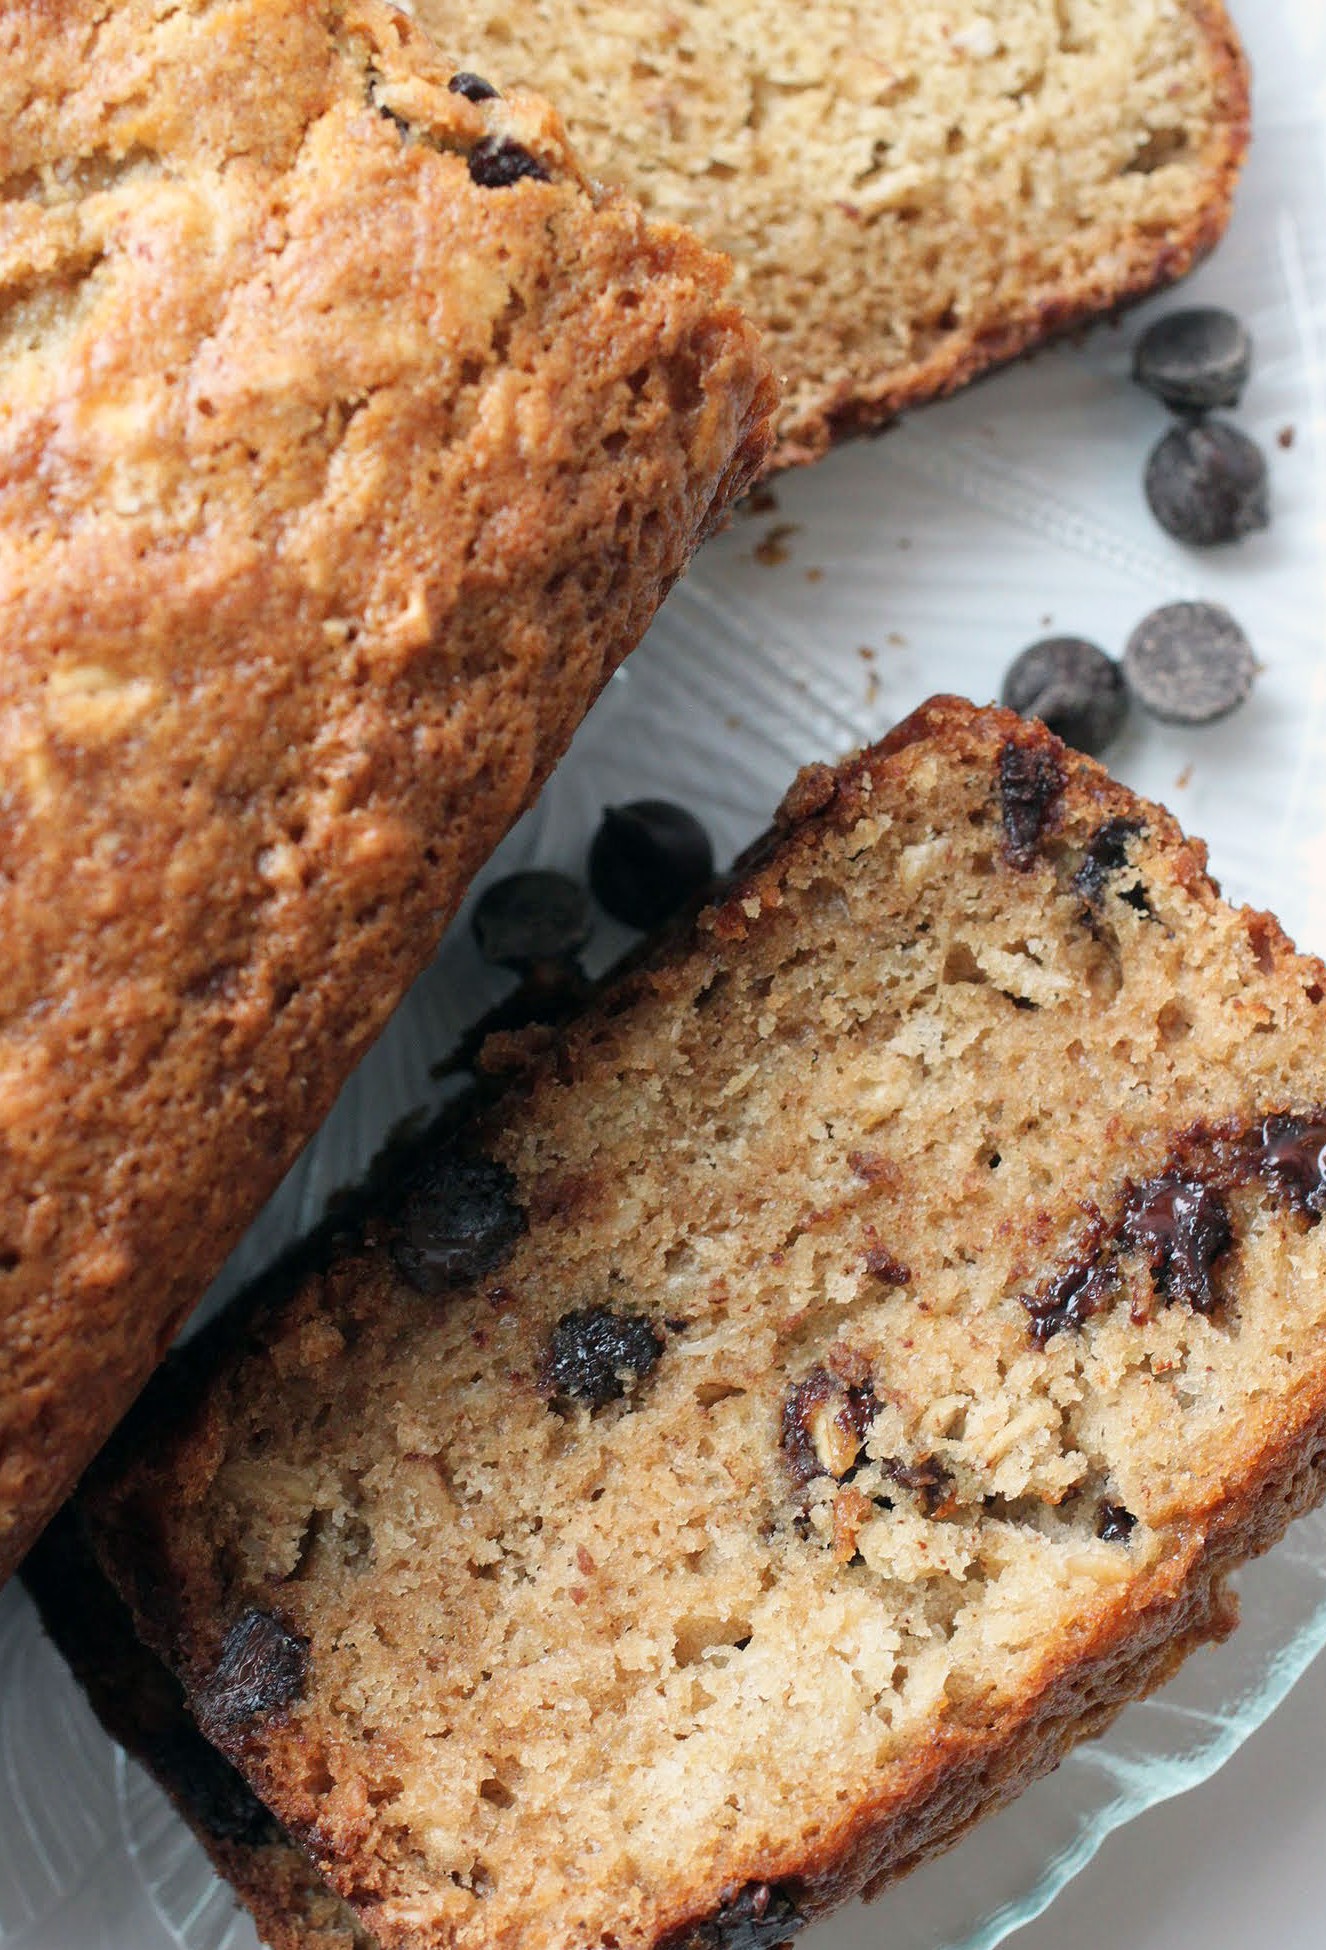 Oatmeal Chocolate Chip Bread